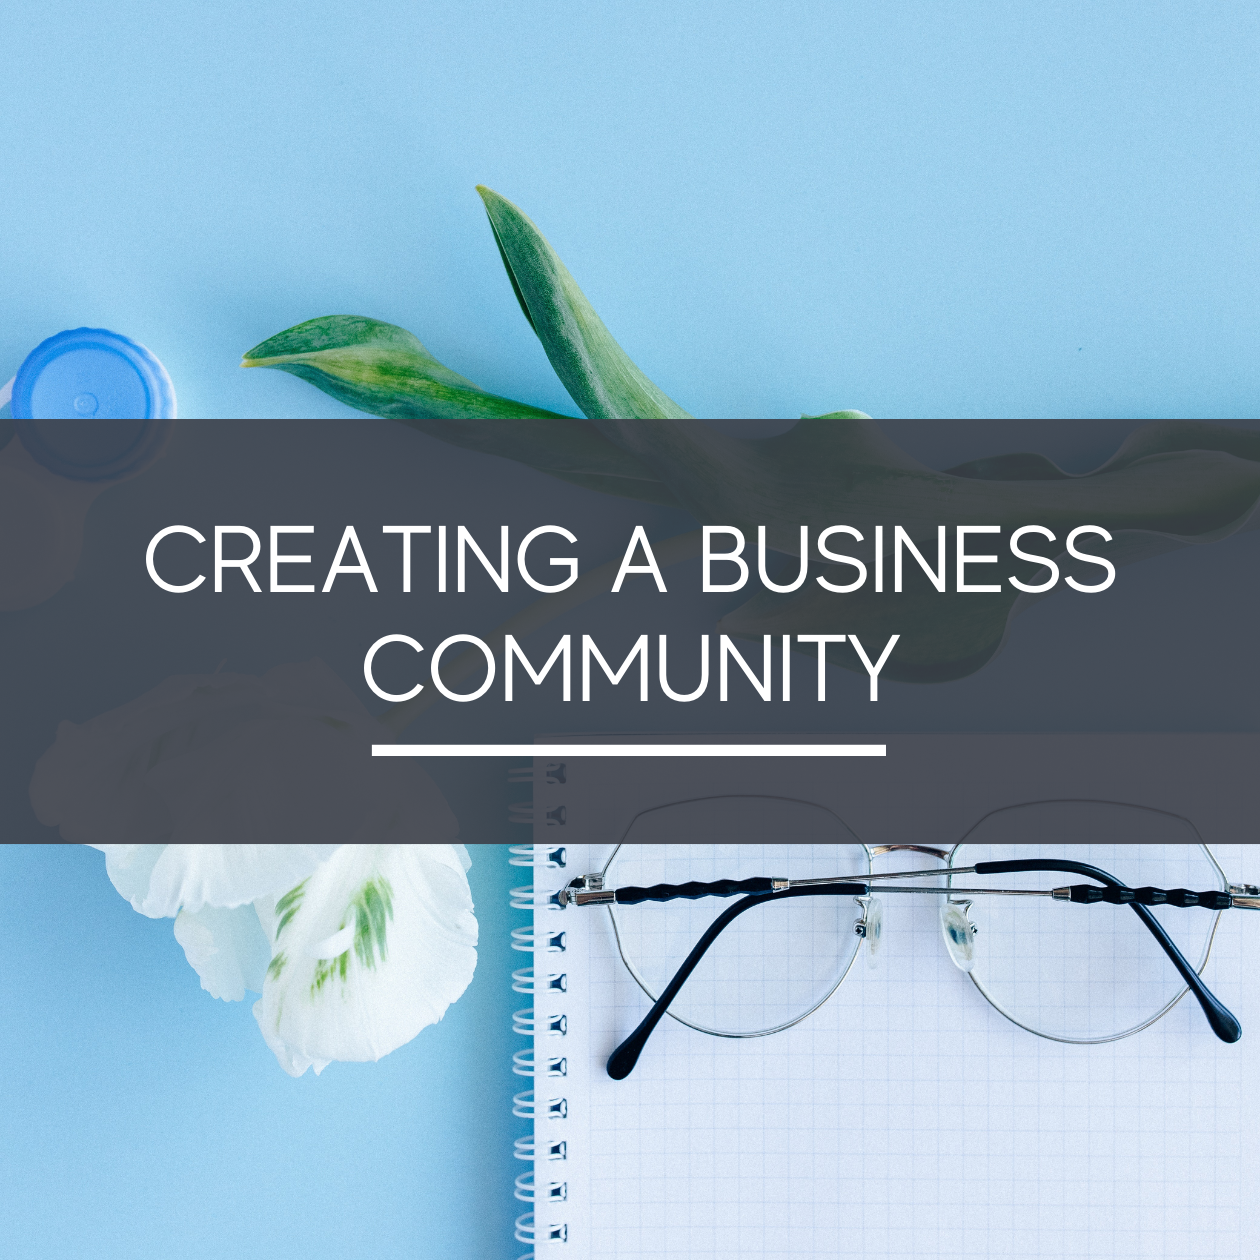 Creating a Business Community - The Growth Manager